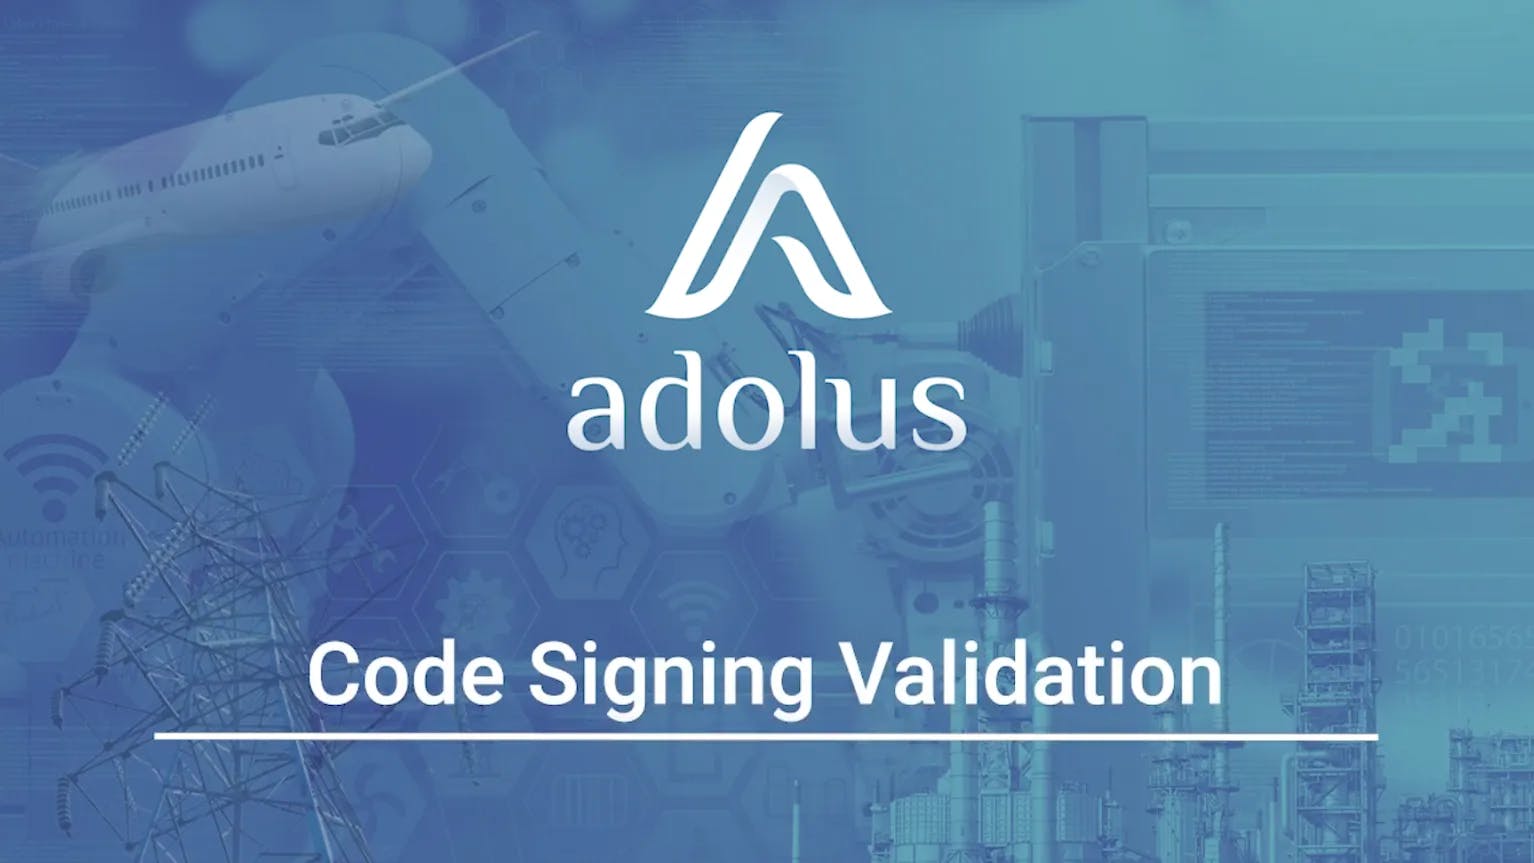 Thumbnail of the Code Signing Validation video